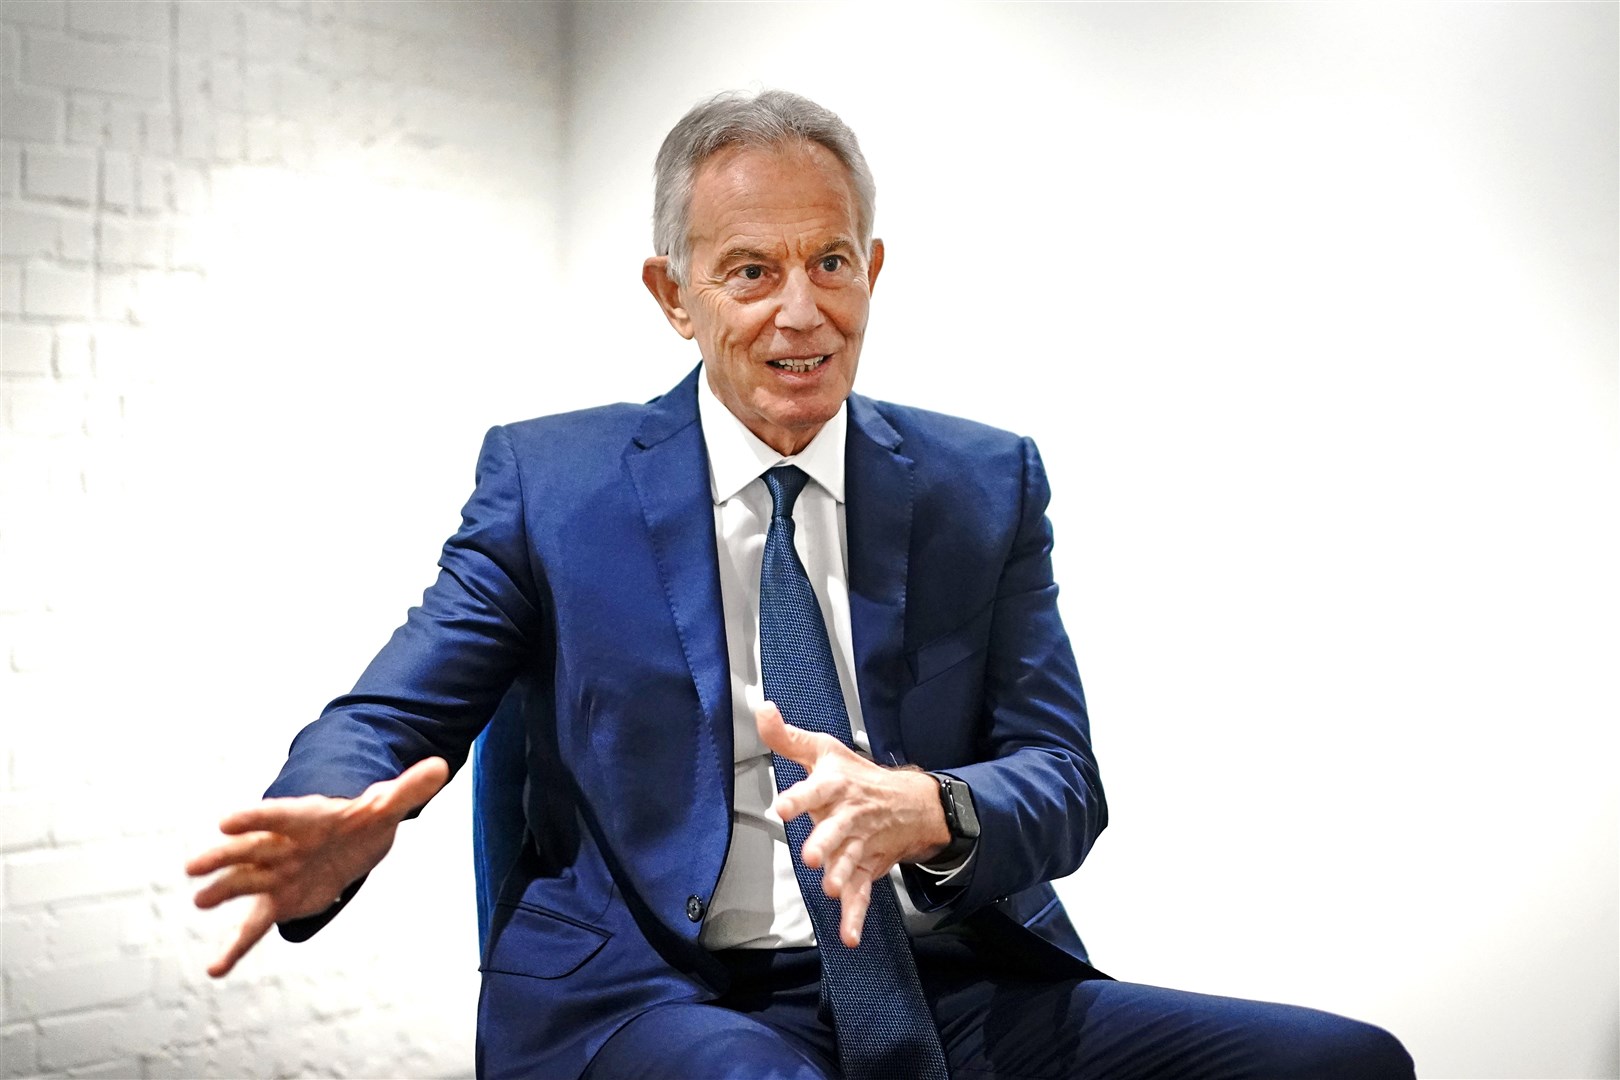 Former prime minister Sir Tony Blair at his offices in central London ahead of the 25th anniversary of the Good Friday Agreement (Victoria Jones/PA)